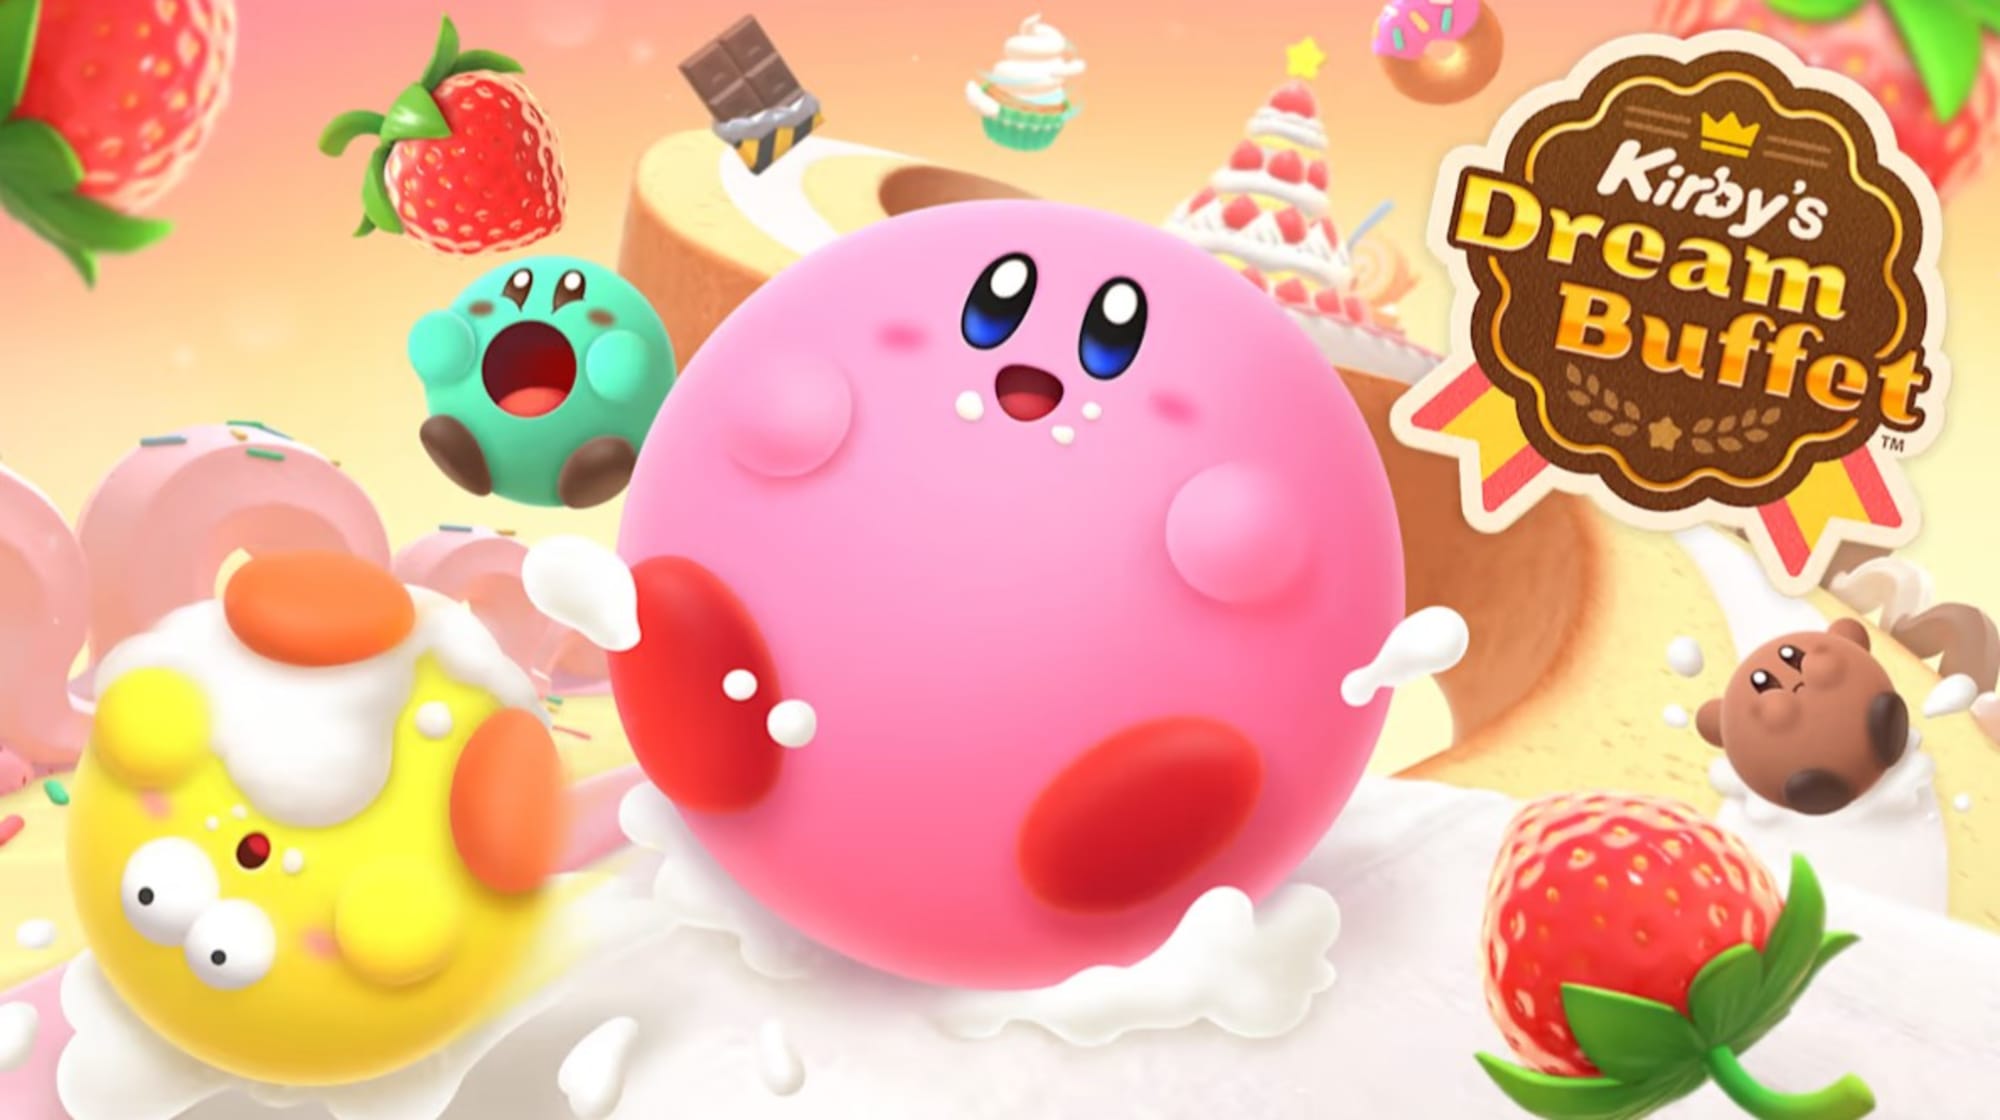 Kirby's Dream Buffet review: The berry juice is not worth the squeeze